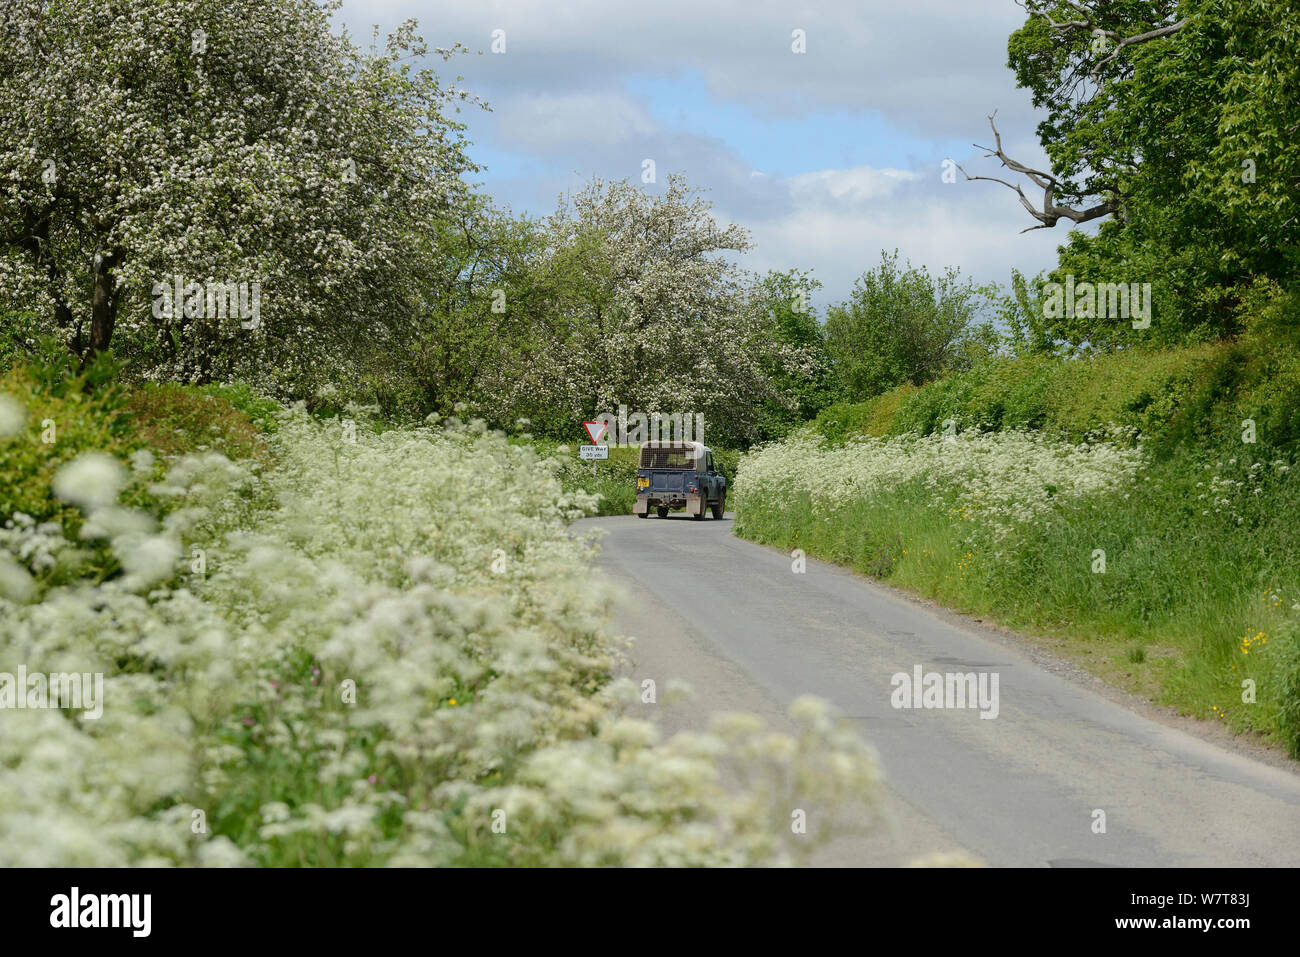 Tractor on road with verge of flowering Cow Parsley (Anthriscus sylvestris) and flowering cider apple trees in background, Herefordshire, UK, June. Stock Photo